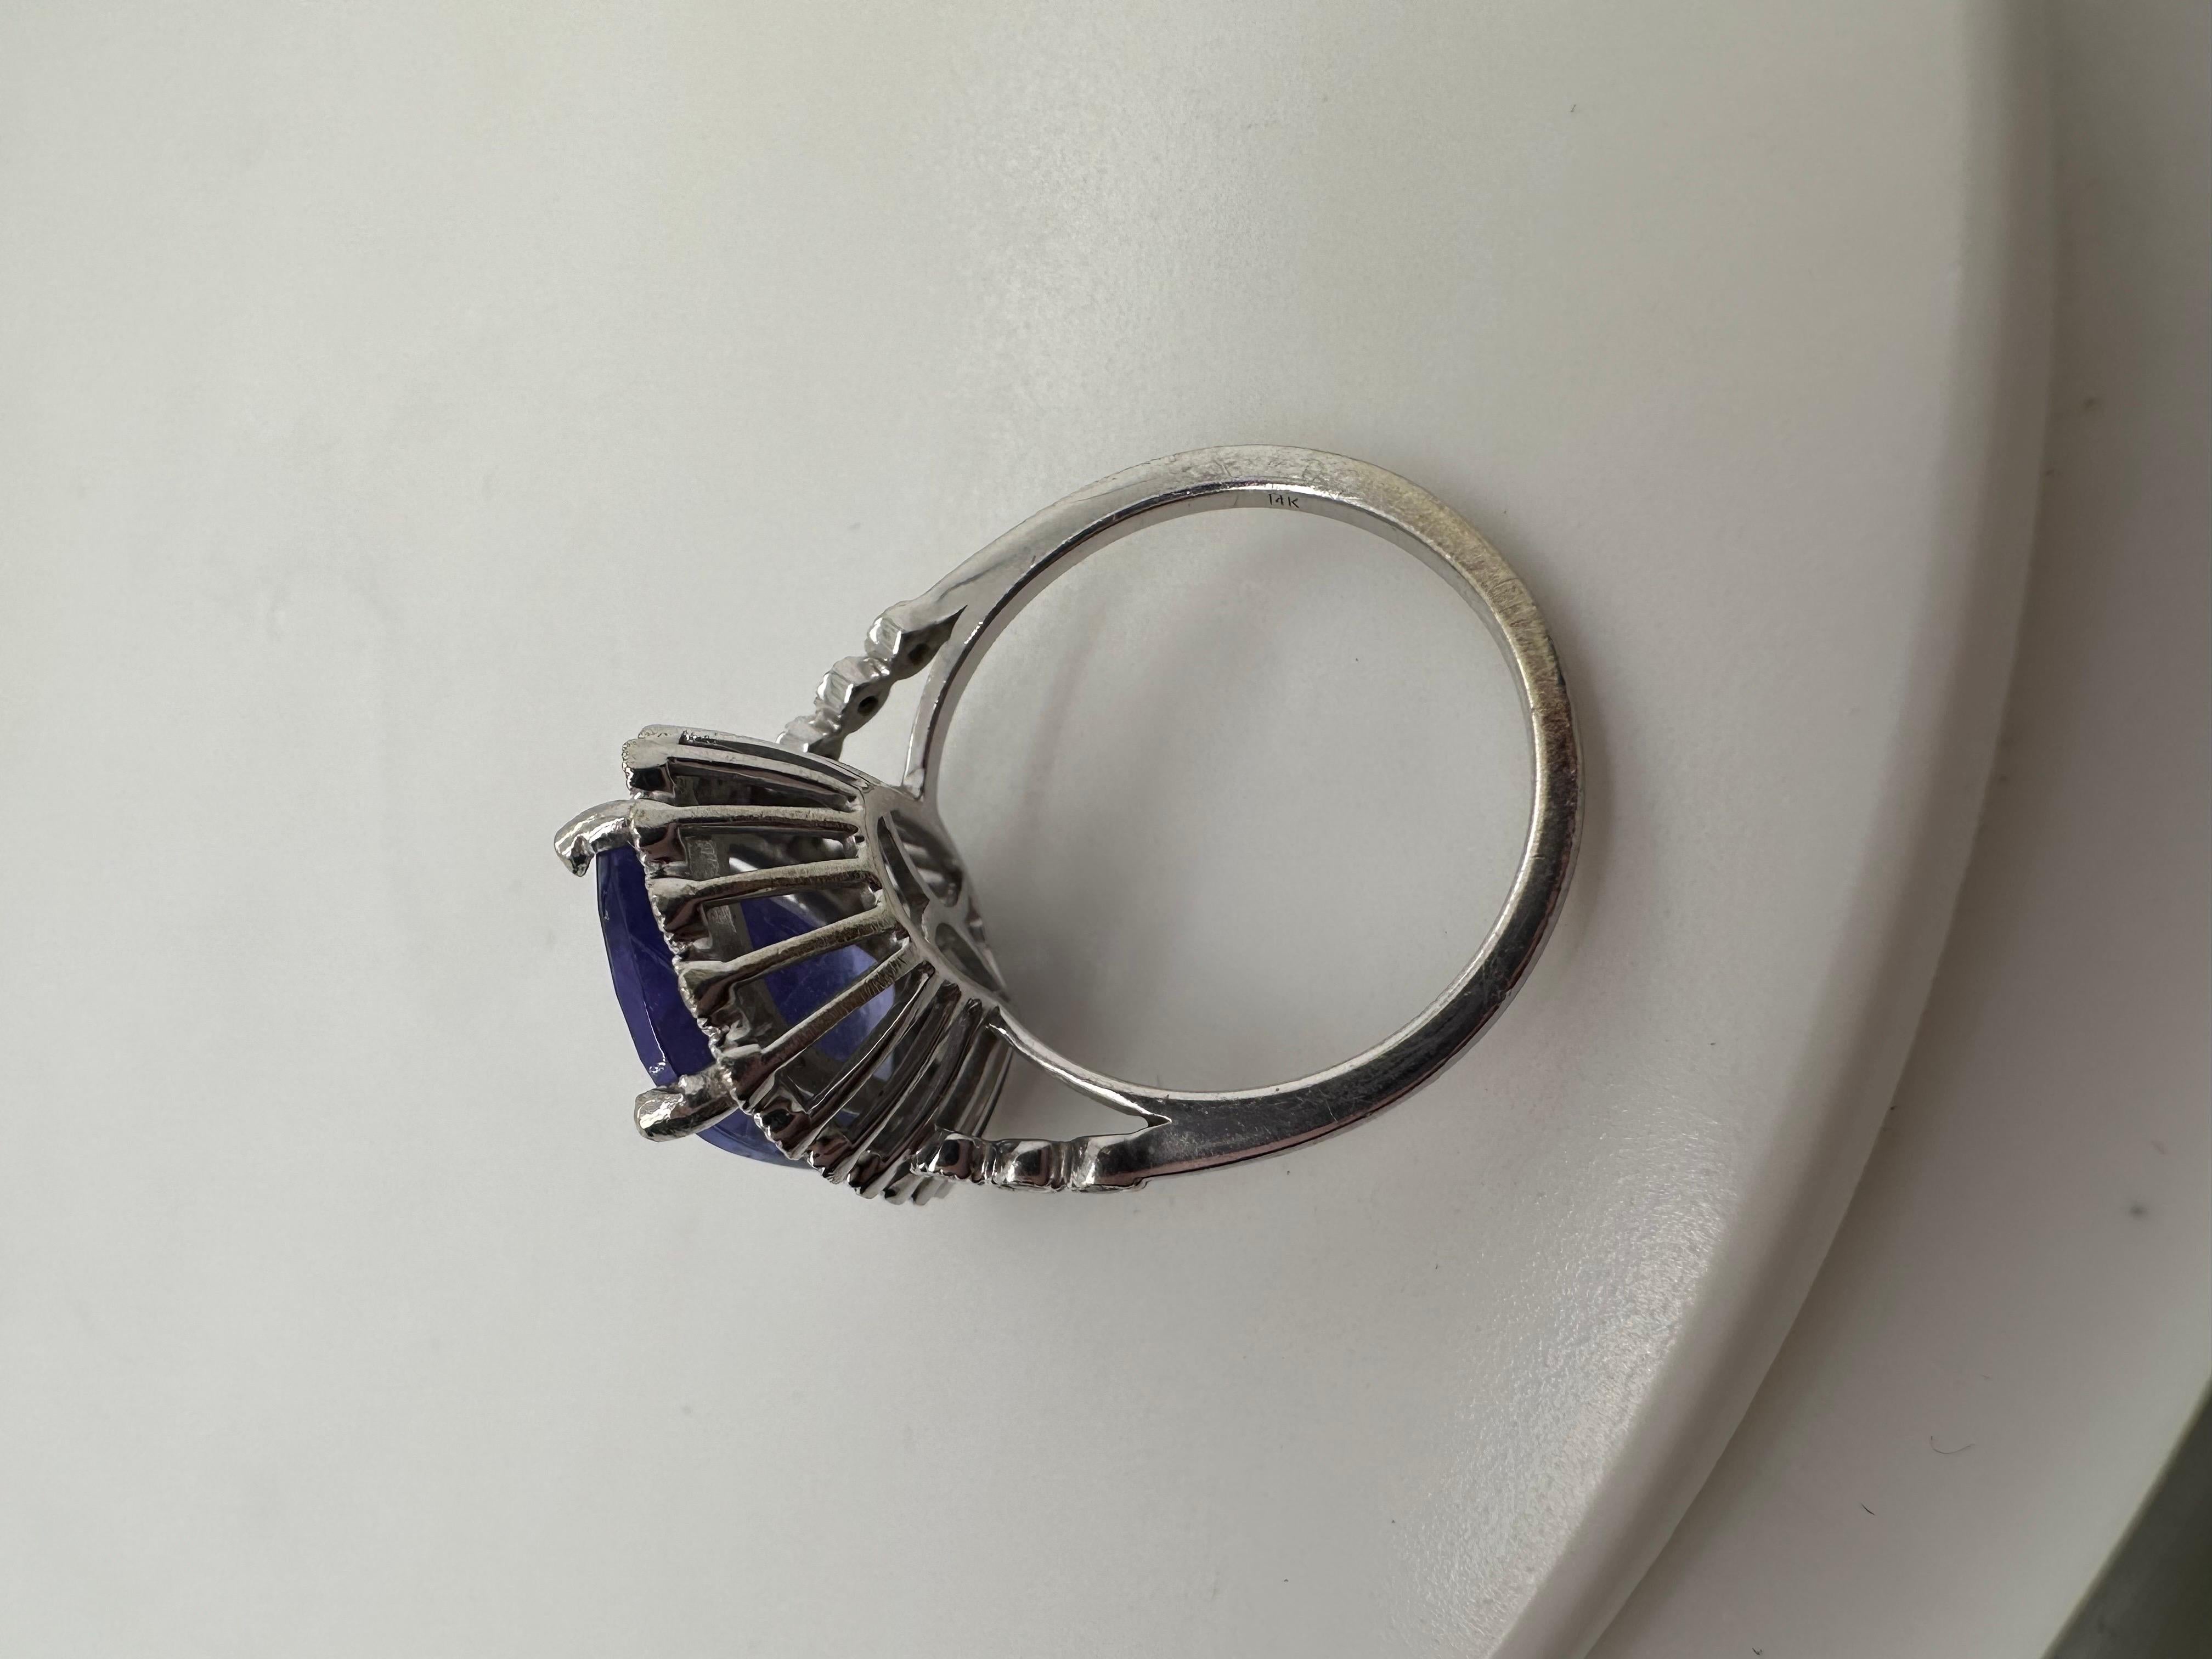 8.25ct Rectangular Cushion Tanzanite gemstone, 100% natural certified as origin Tanzania. An aboslute gorgeous color of purplish blue. The design looks vintage and very fethery, its not heavy and not flimsy its a sterdy elegant ring.This ring will